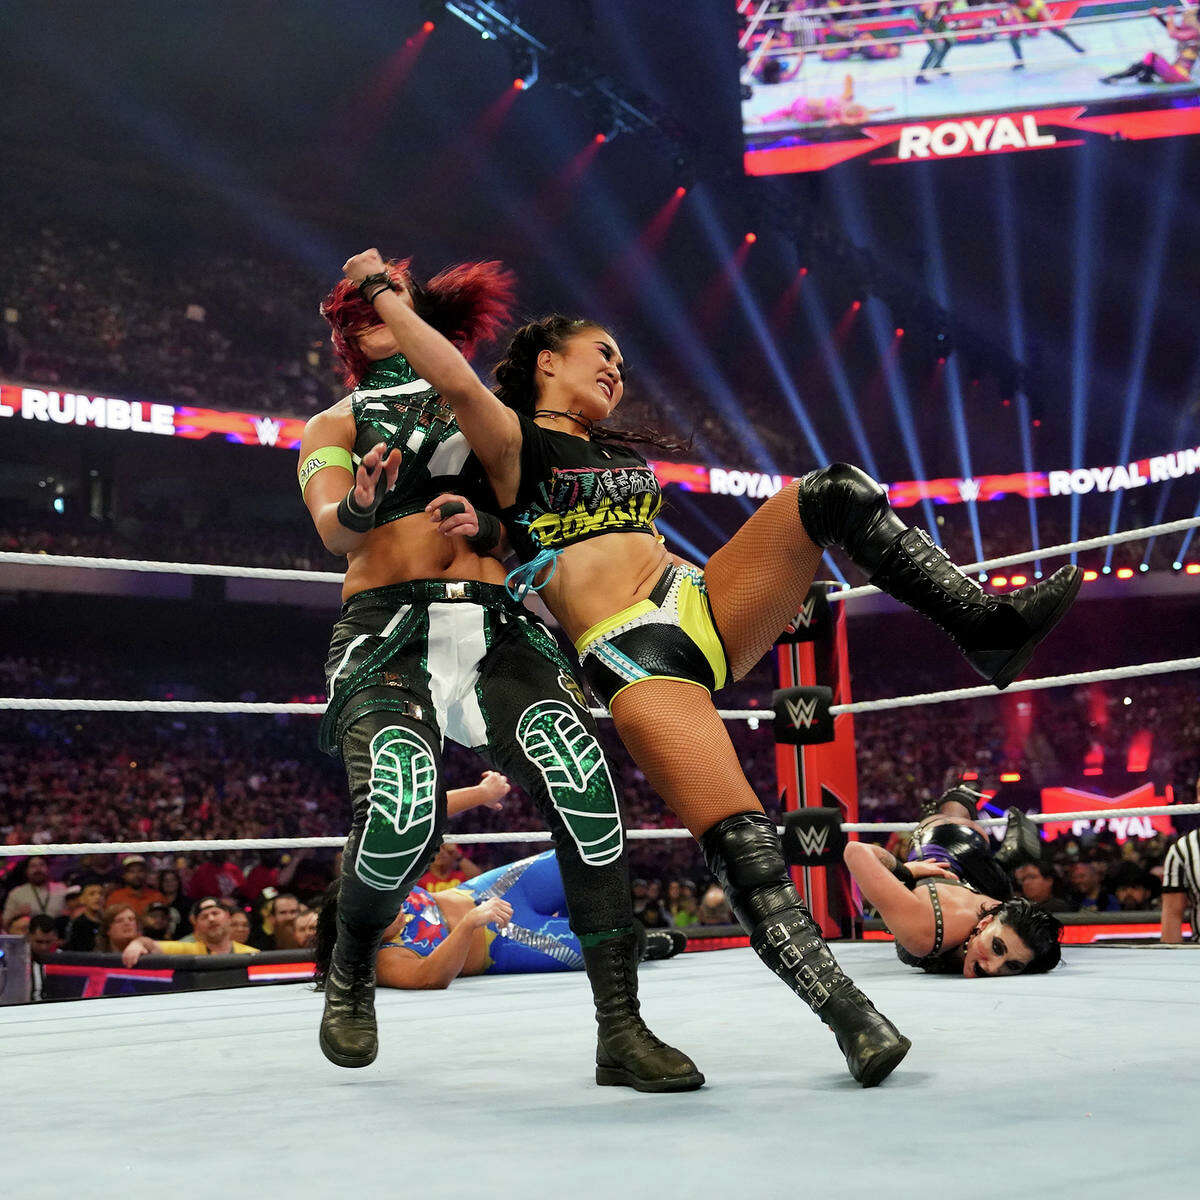 Laredo's Roxanne Perez made her WWE main roster pay-per-view debut at the Royal Rumble on Saturday, Jan. 28, 2023 in San Antonio, Texas.